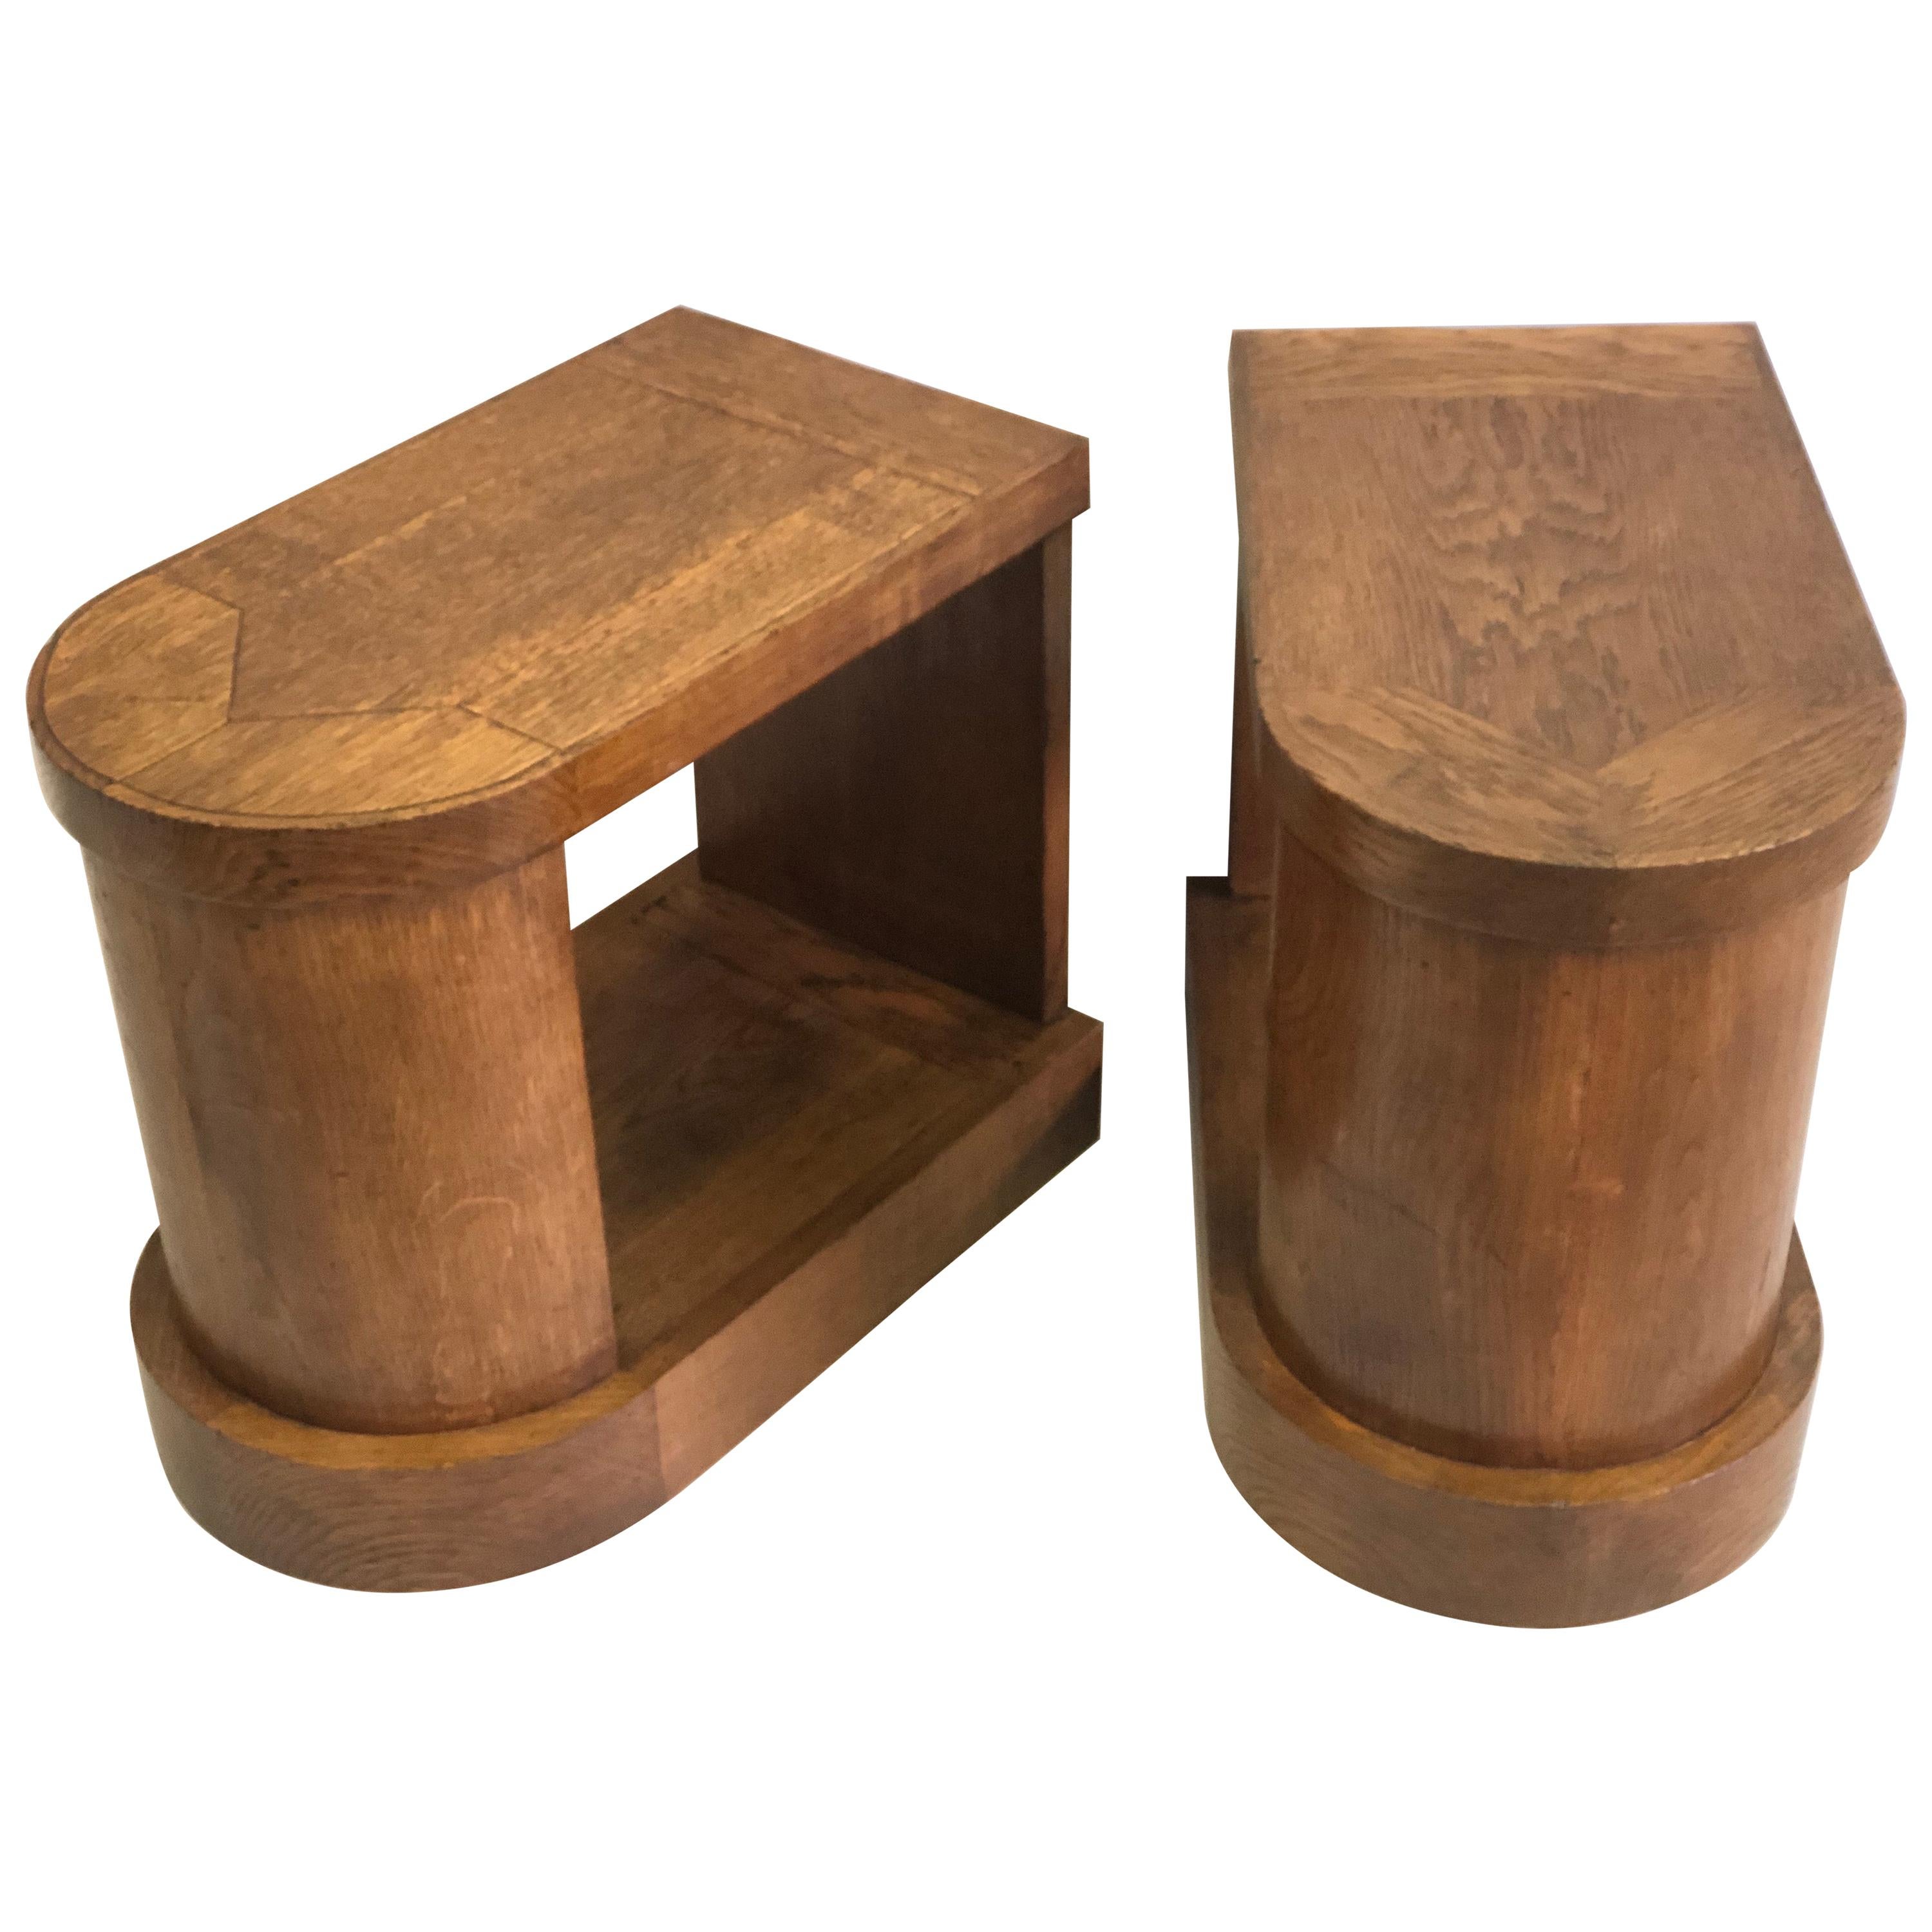 Pair of French Mid-Century Modern Oak End Tables or Nightstands, Pierre Legrain